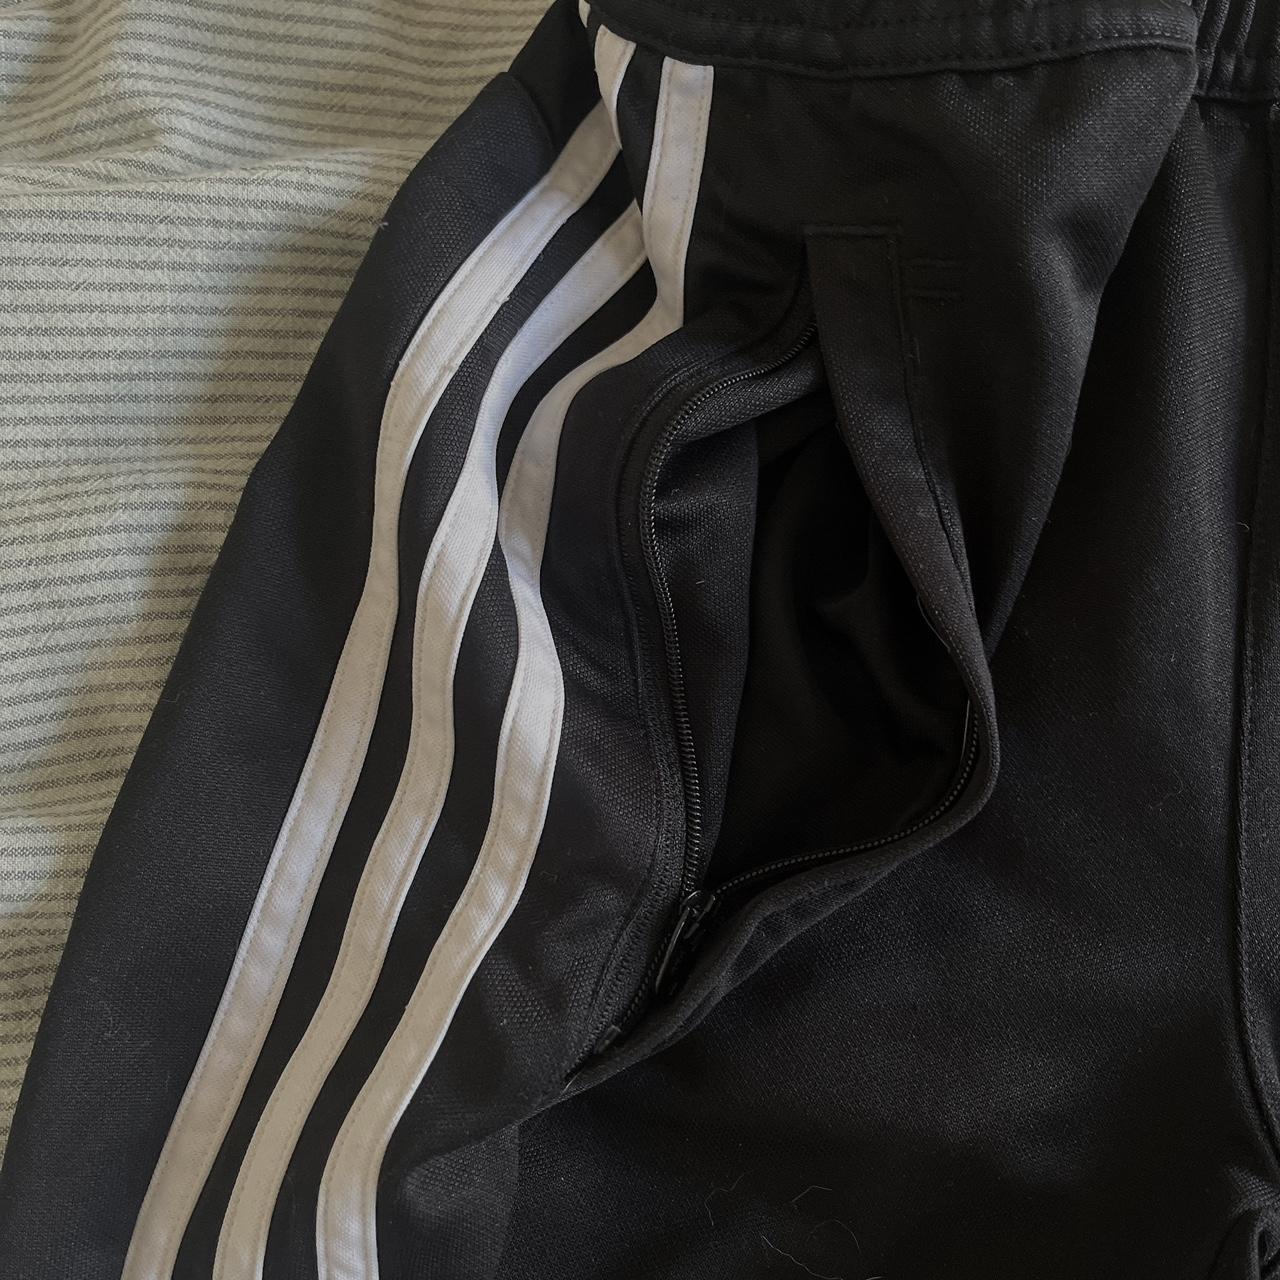 Adidas Climacool Track Style Pants, Women's - Depop